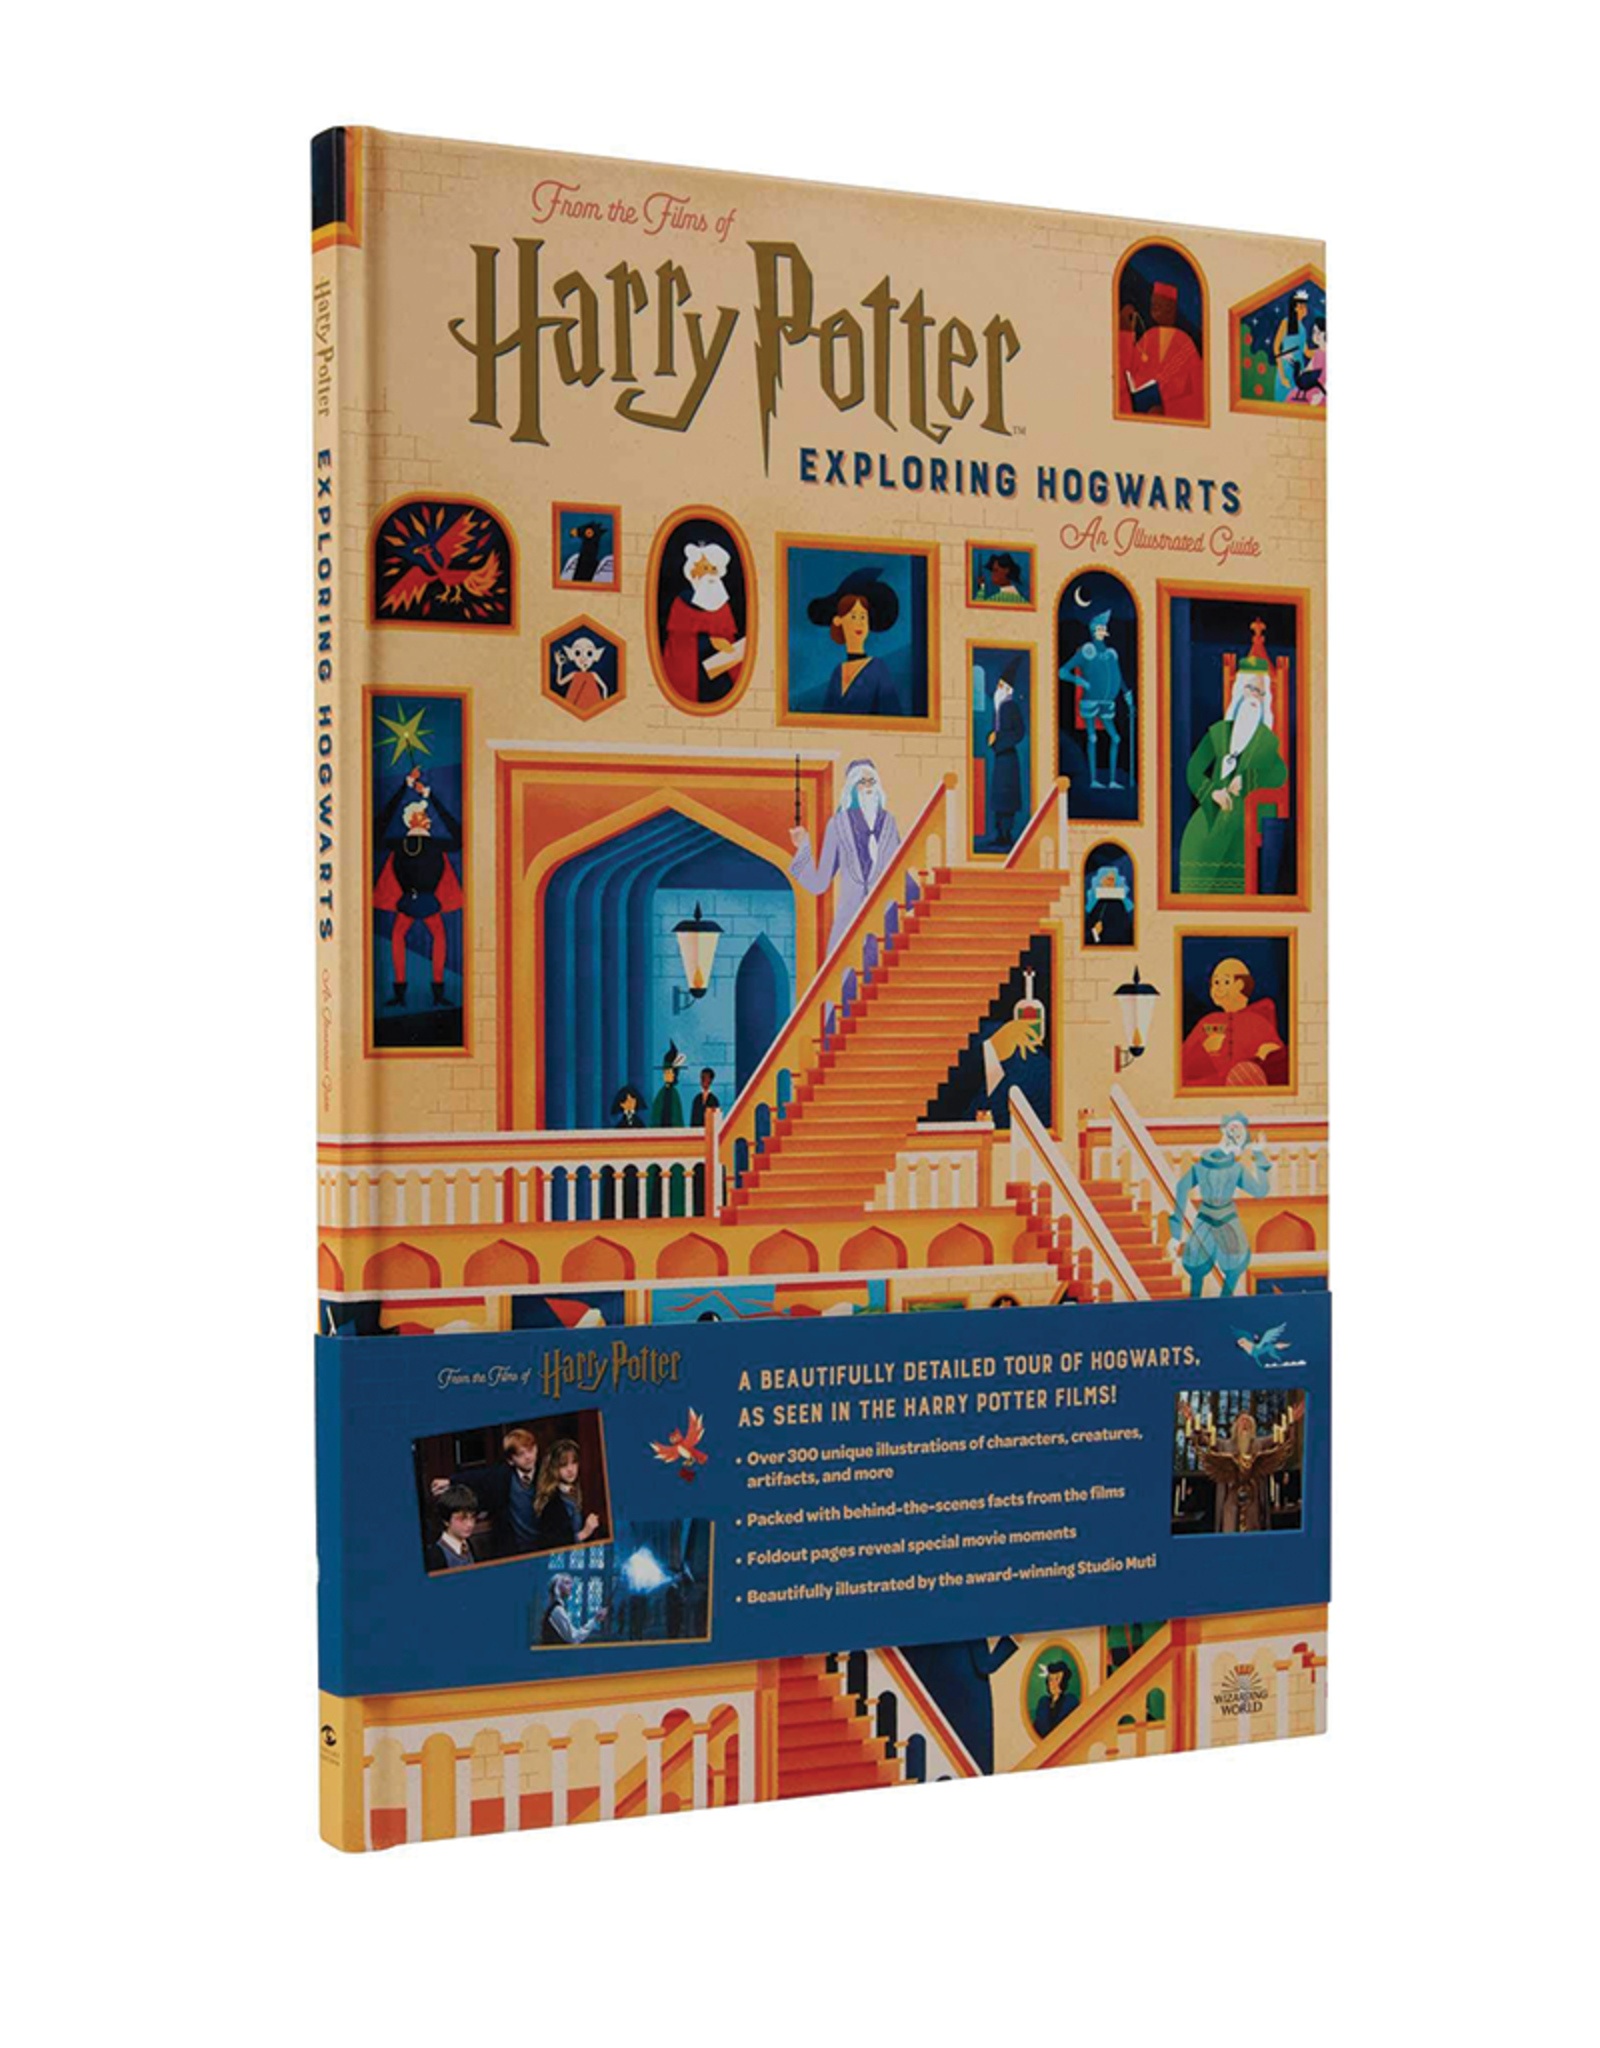 Exploring Hogwarts: An Illustrated Harry Potter Guide